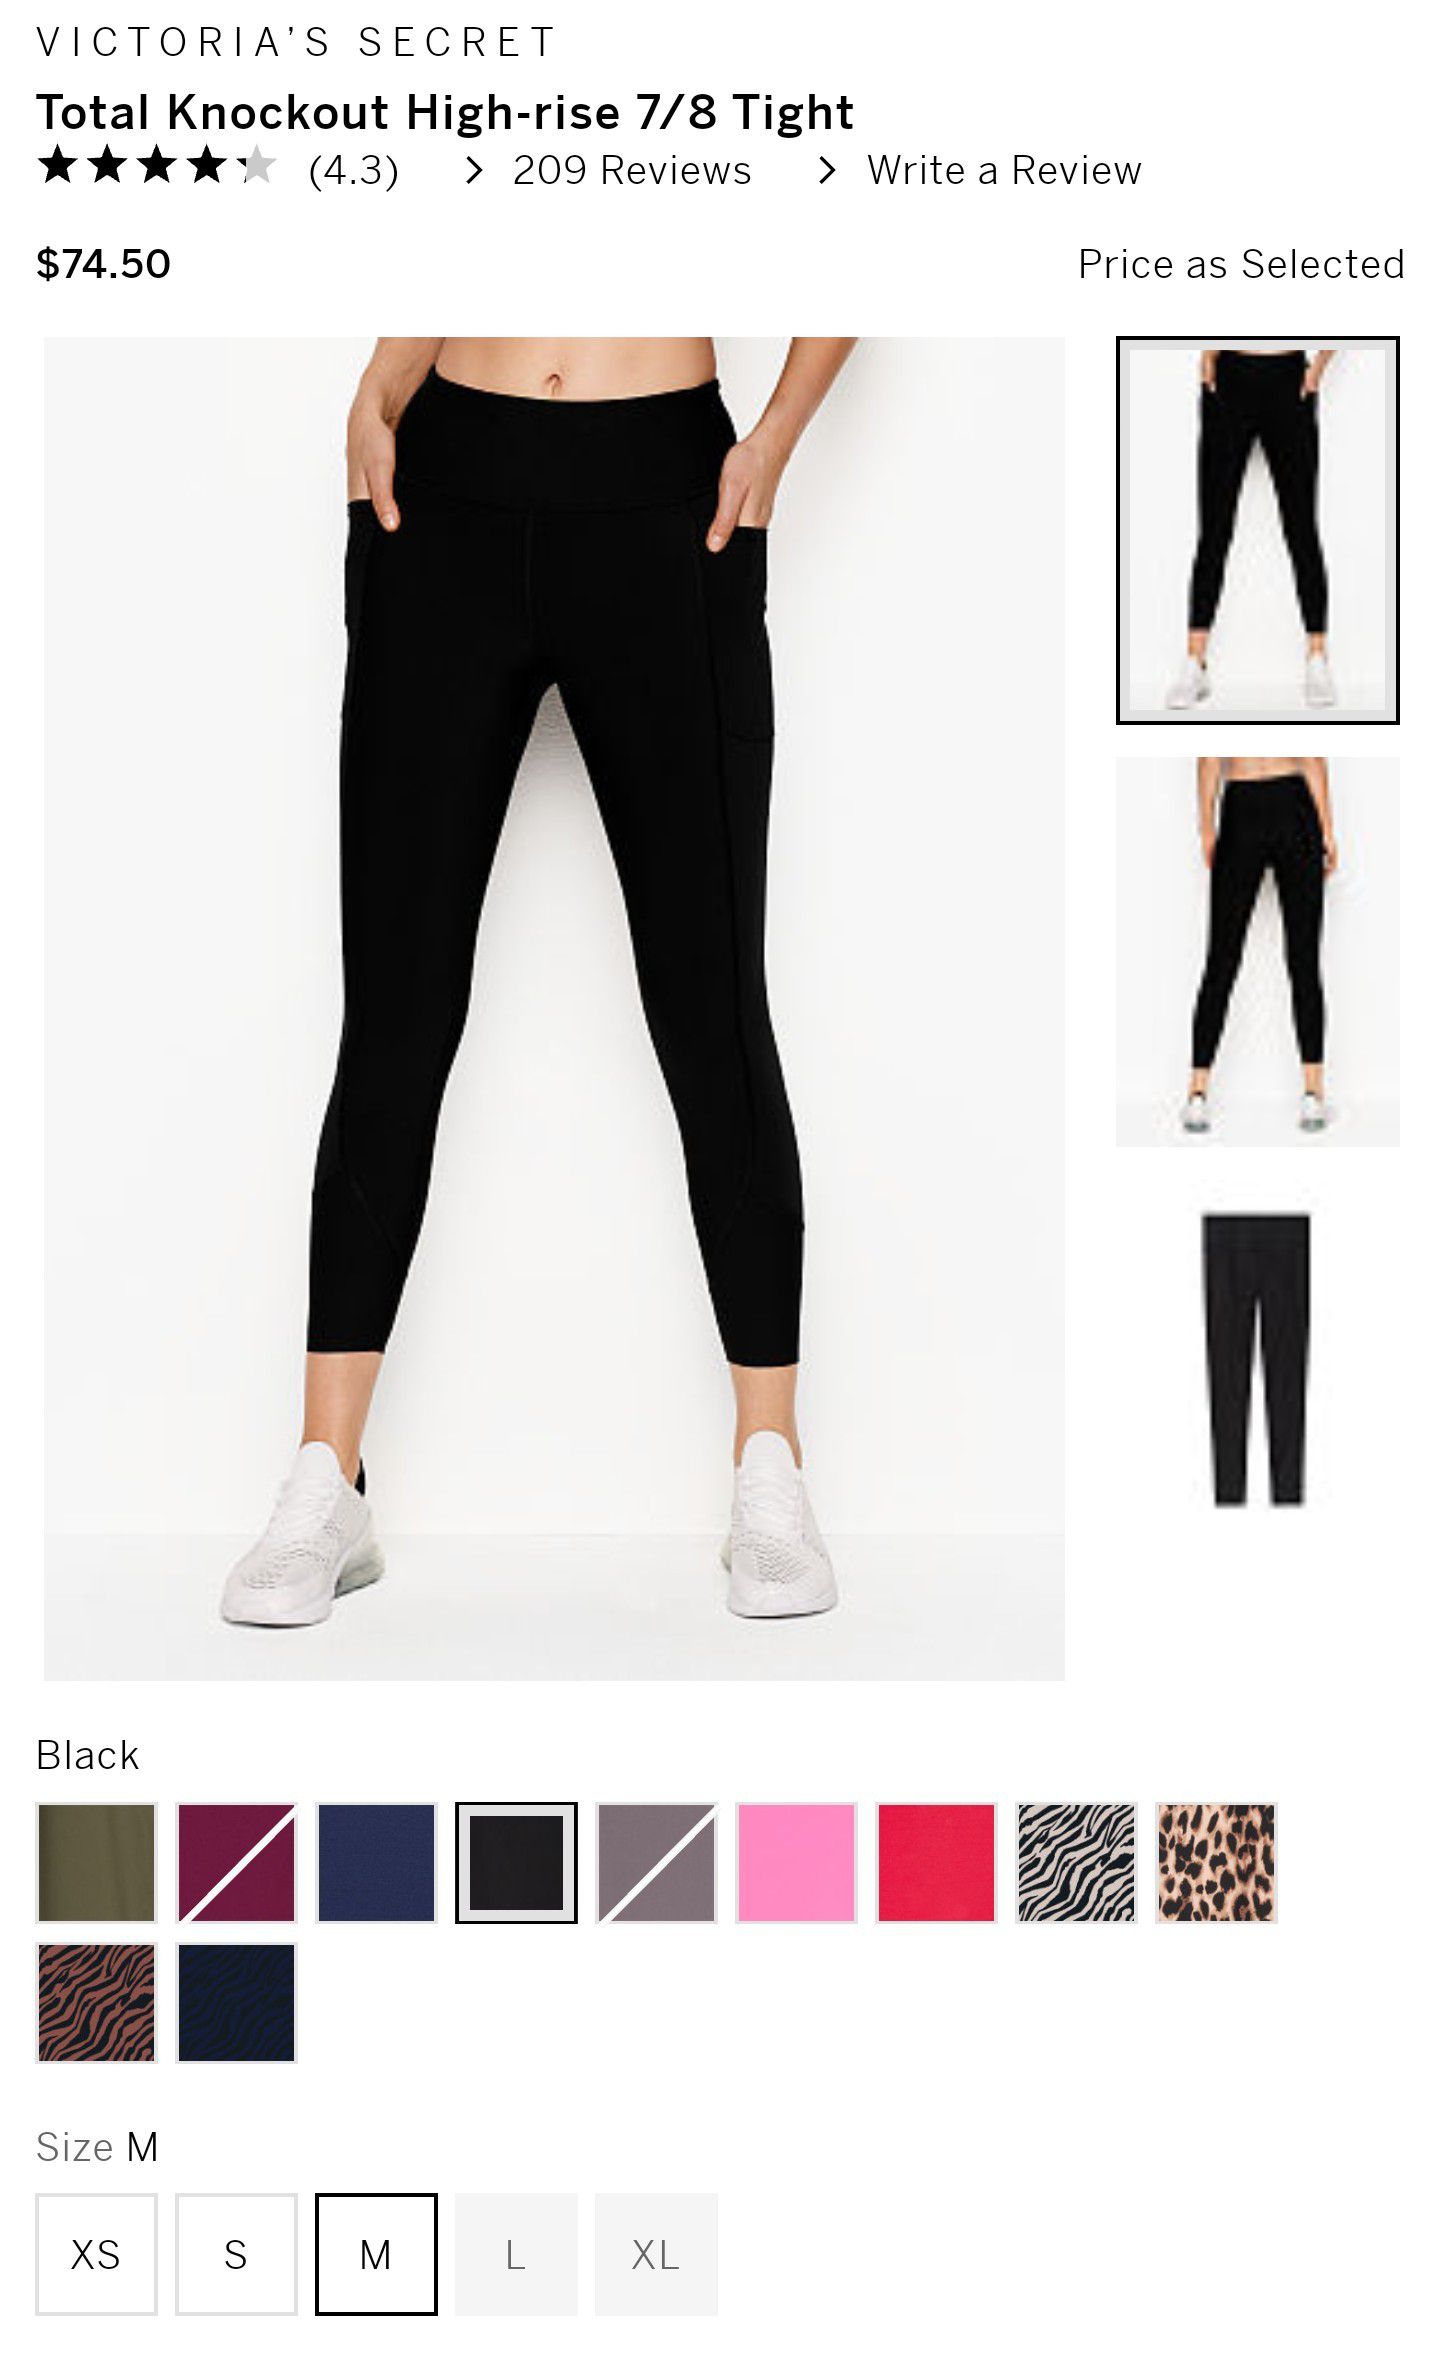 Brand New Victoria's Secret Sport Knockout High-Rise Leggings with